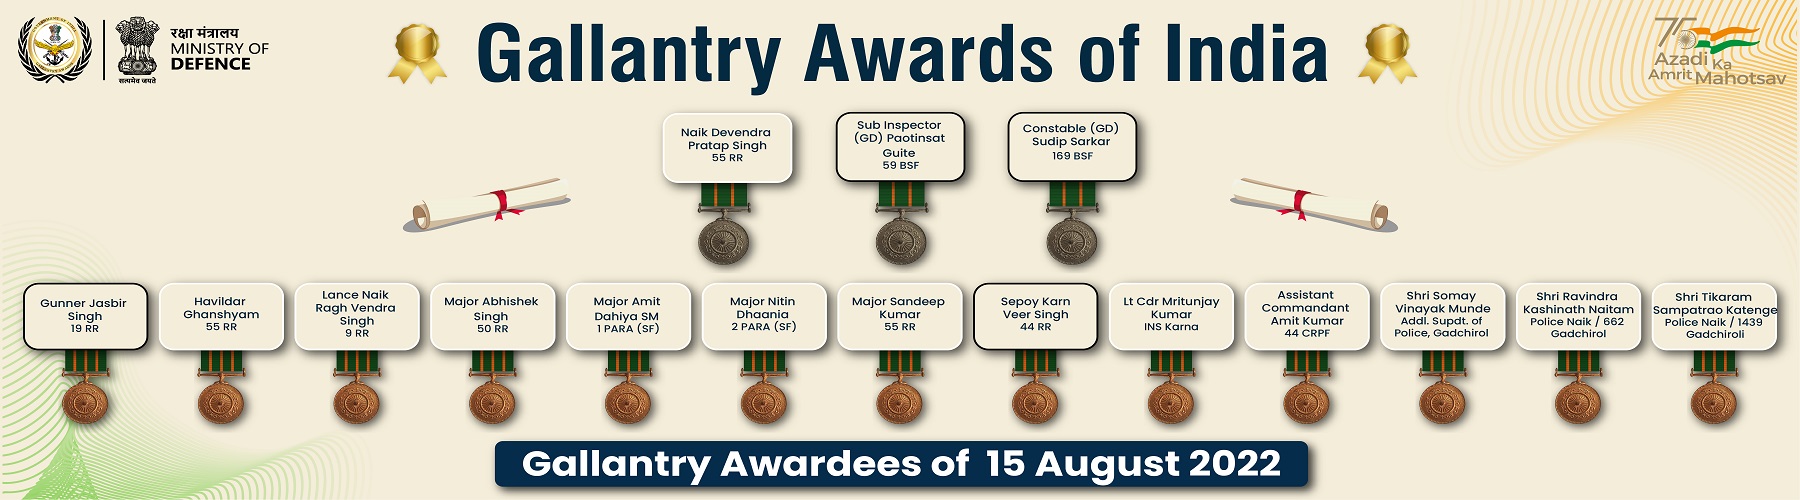 GALLANTRY AWARDS INDEPENDENCE DAY 2022